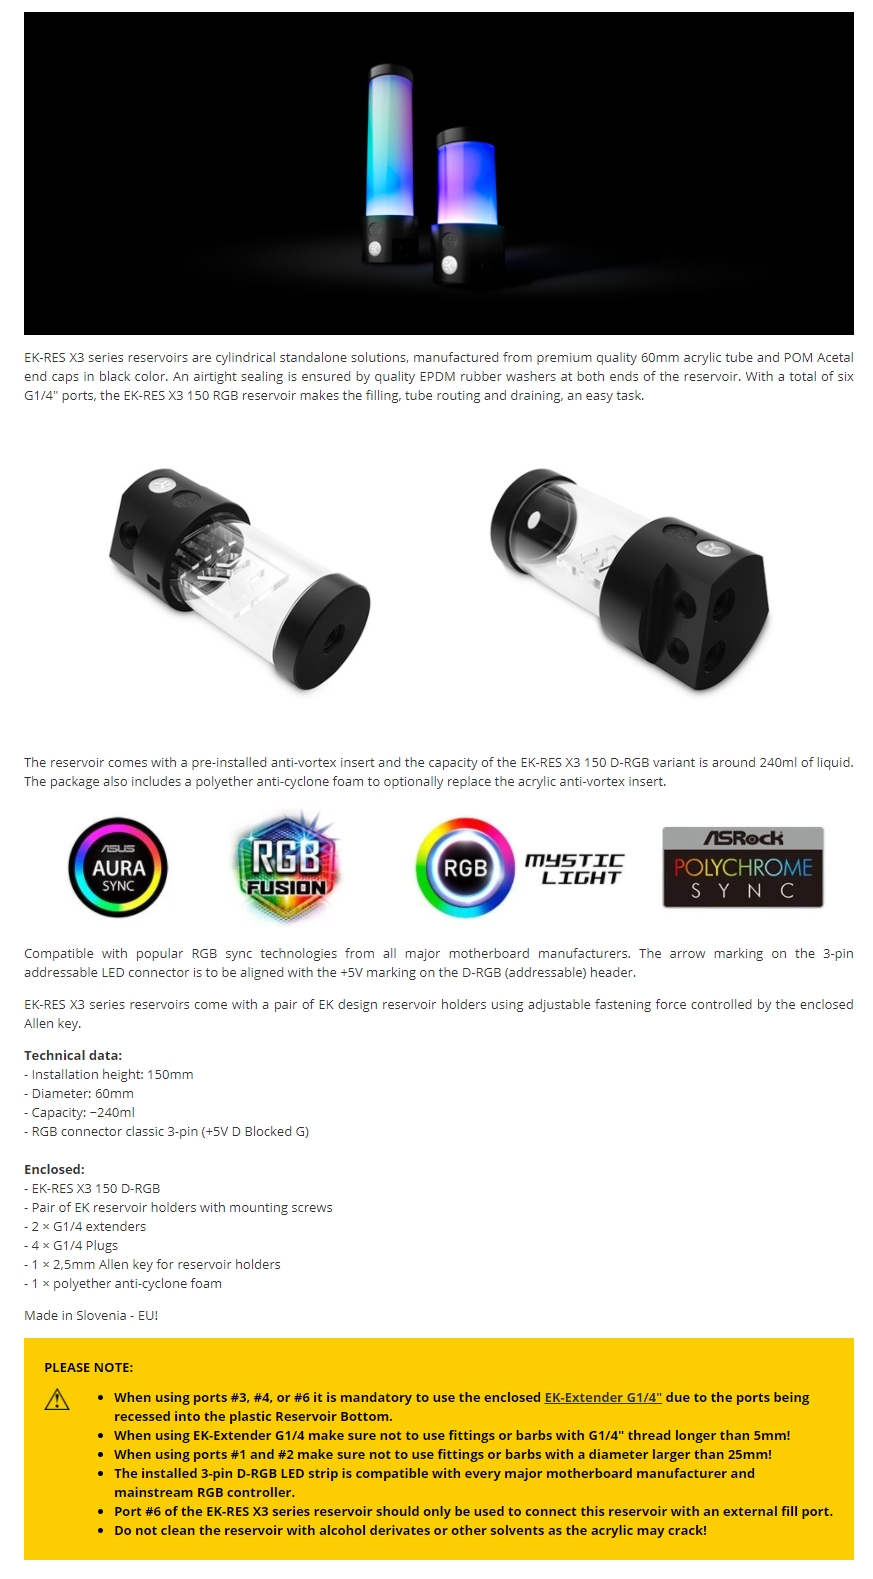 A large marketing image providing additional information about the product EK RES X3 150 D-RGB 150mm Tube Reservoir - Acetal - Additional alt info not provided